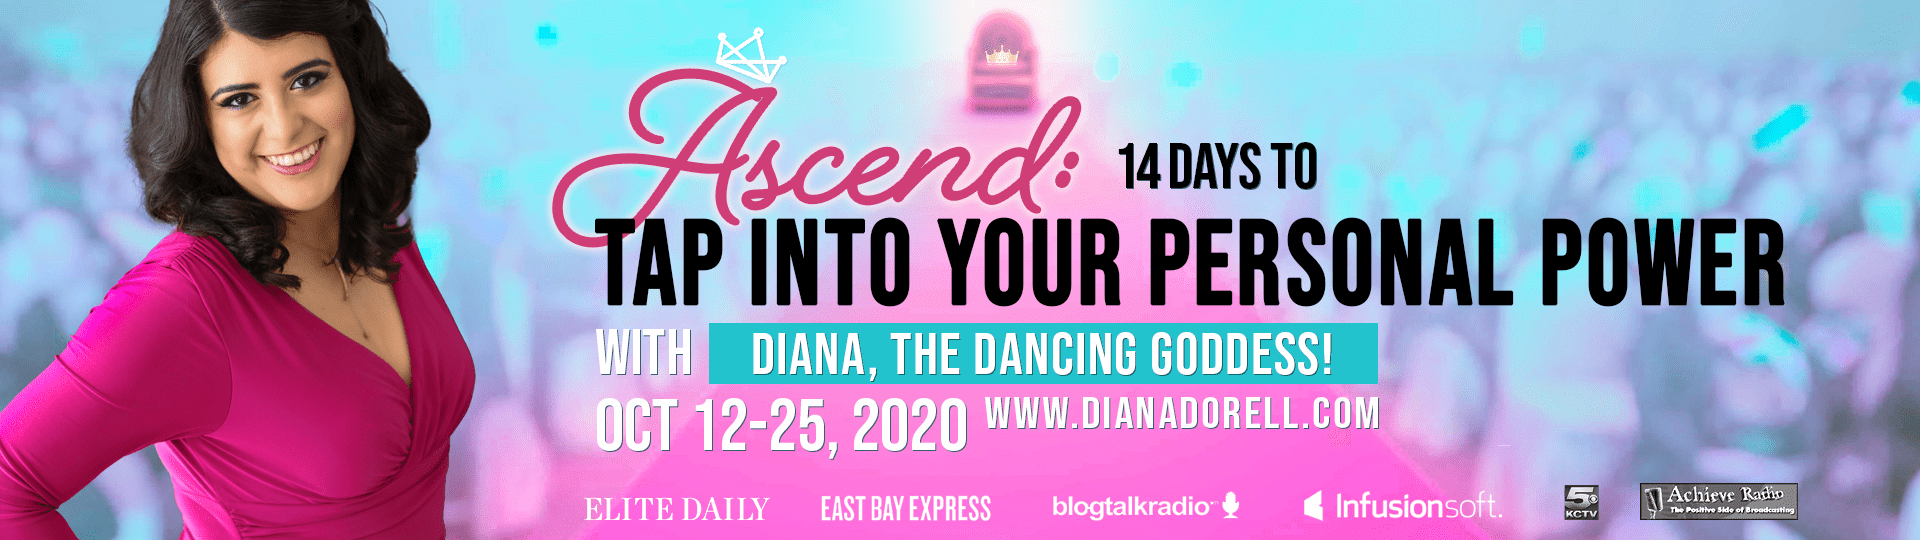 Ascend: 14 Days to Tap Into Your Personal Power